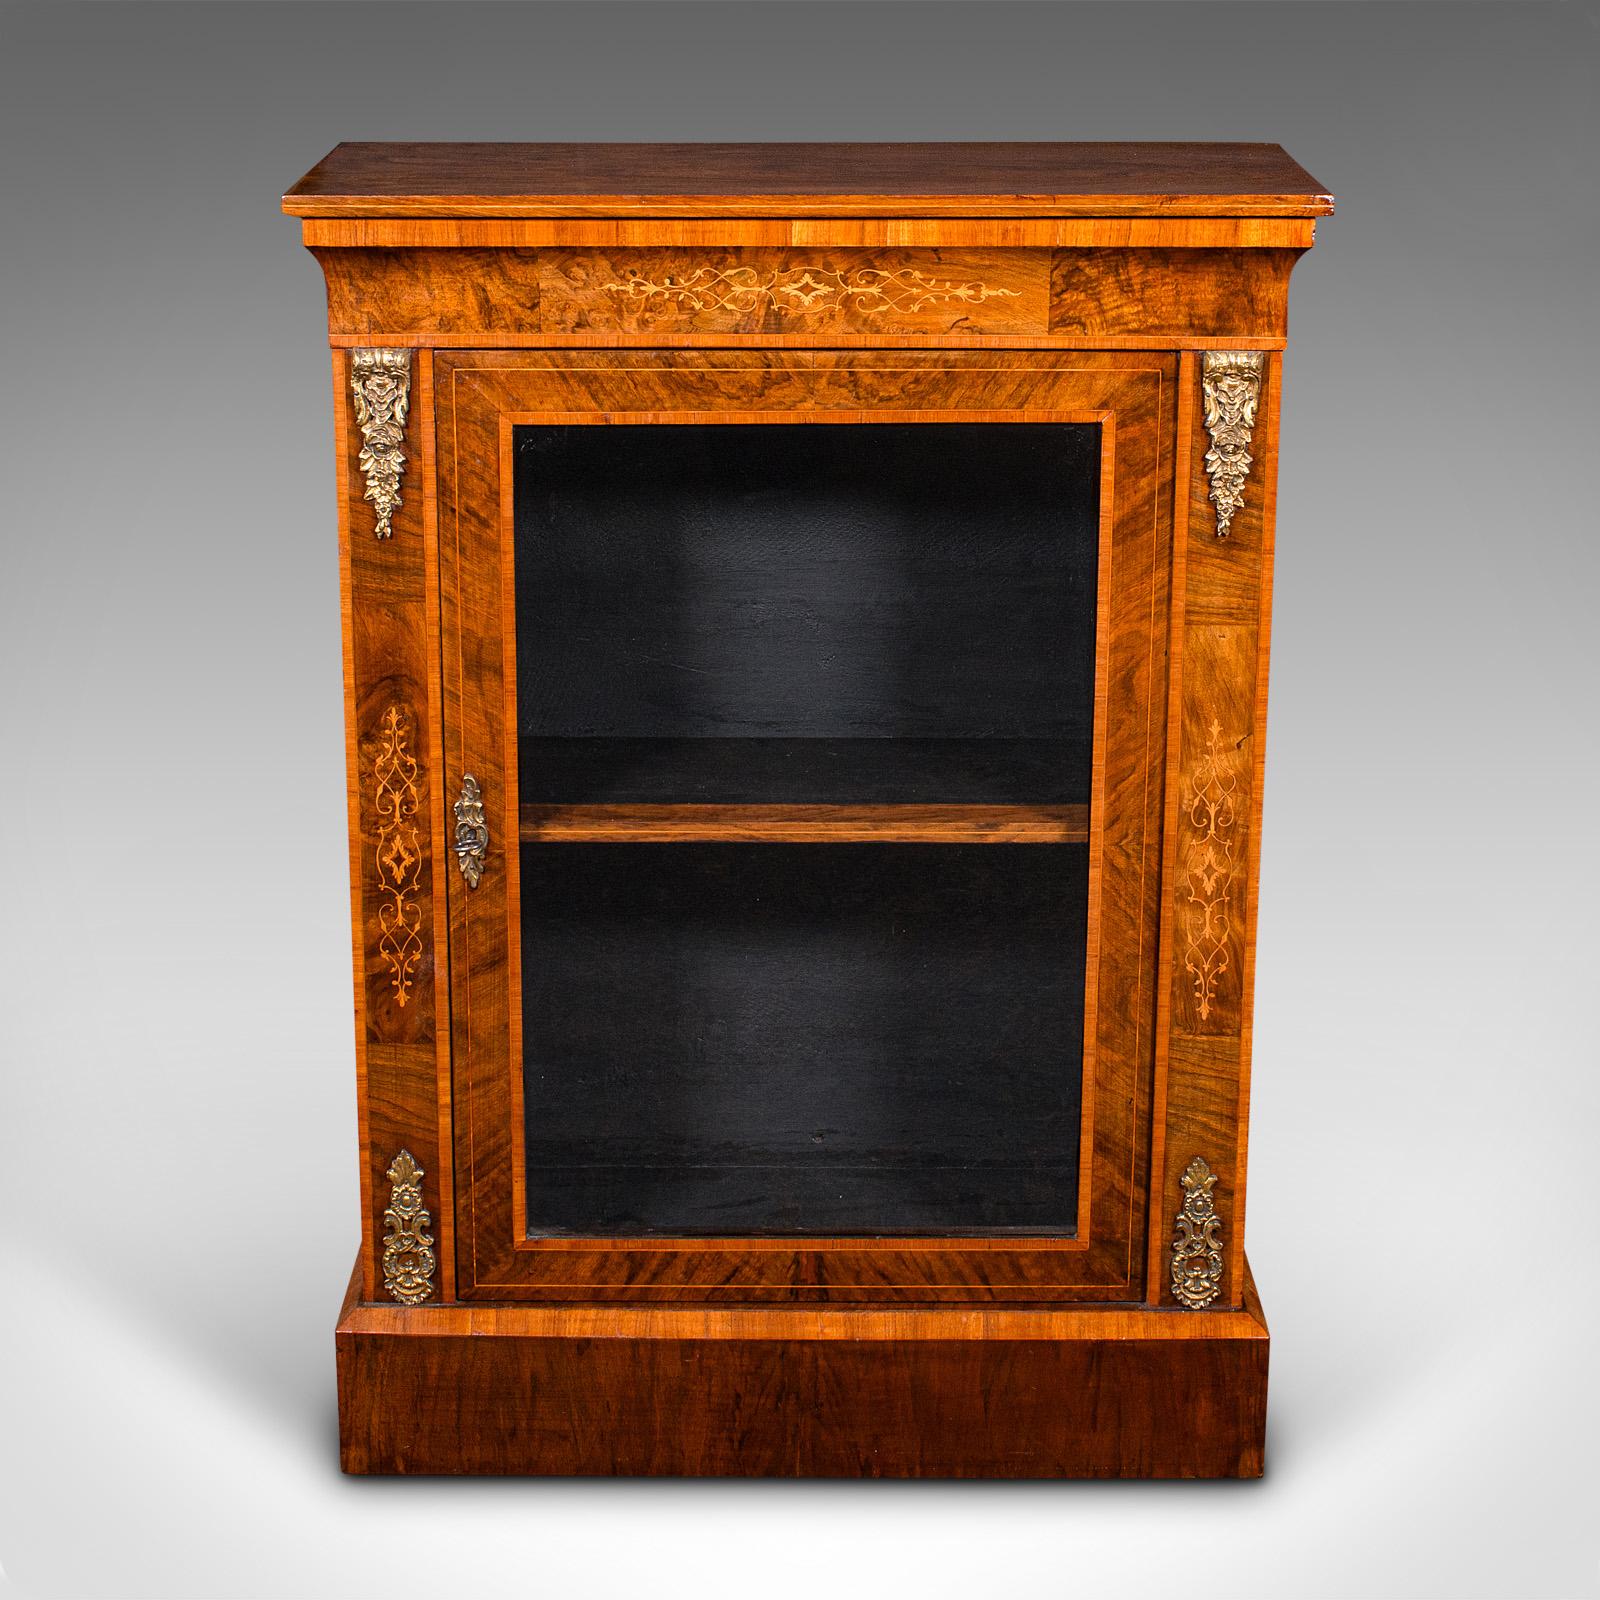 This is an antique pier cabinet. An English, walnut glazed display cupboard, dating to the Victorian period, circa 1870.

Graced with delightful inlaid detail and rich colour
Displays a desirable aged patina and in very good order
Select burr walnut